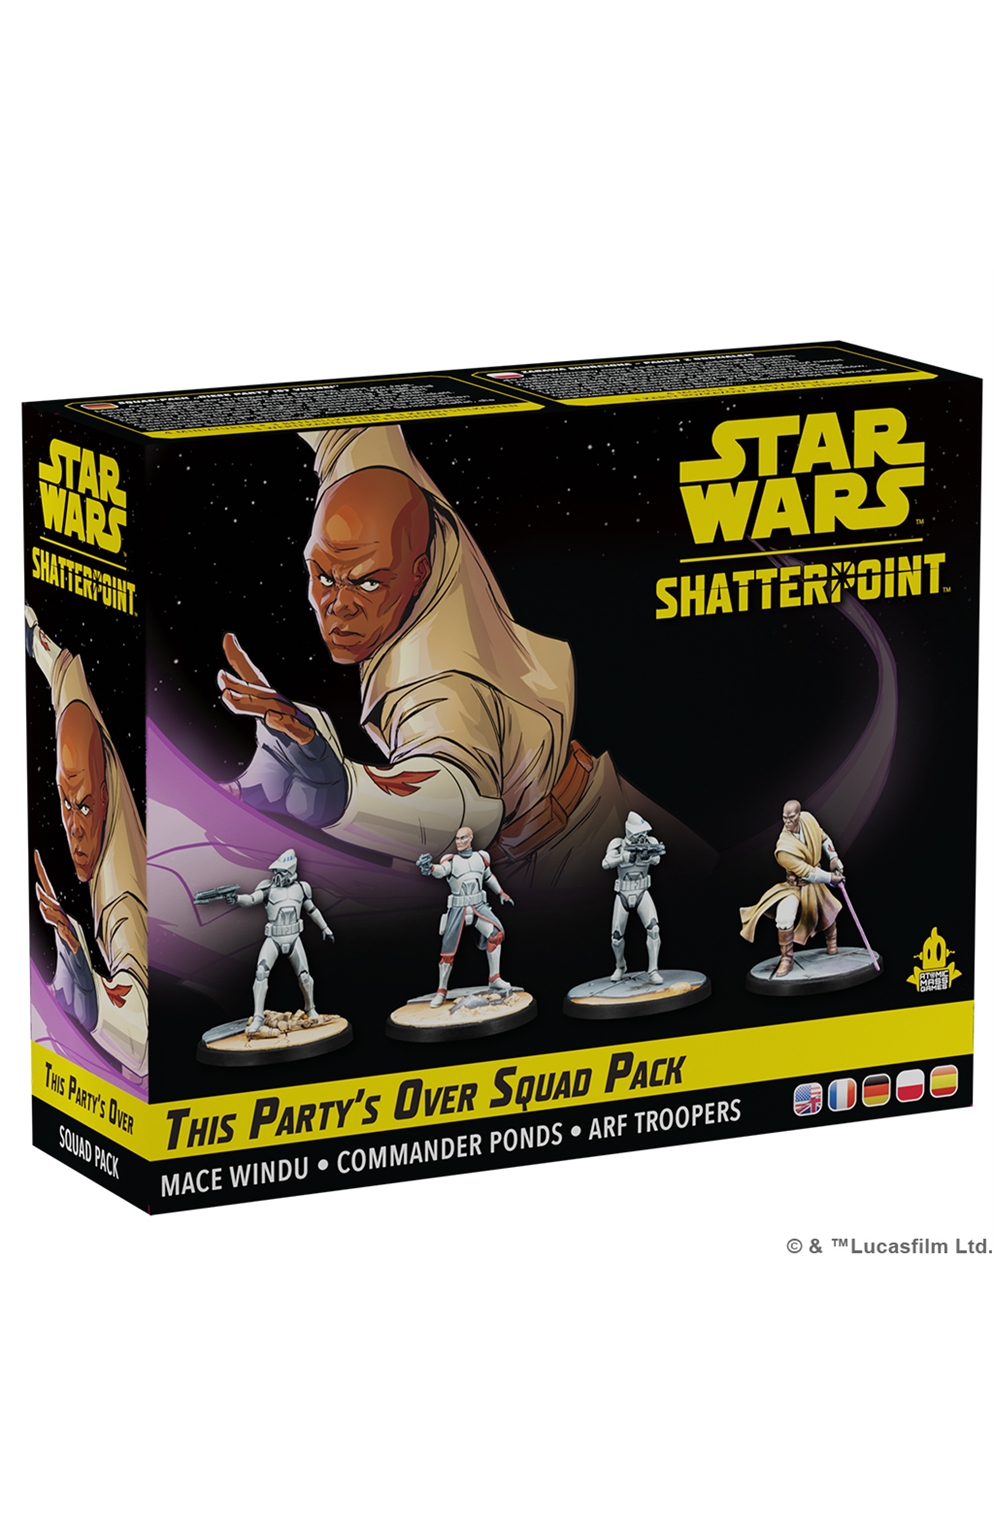 Star Wars Shatterpoint: This Party's Over Squad Pack